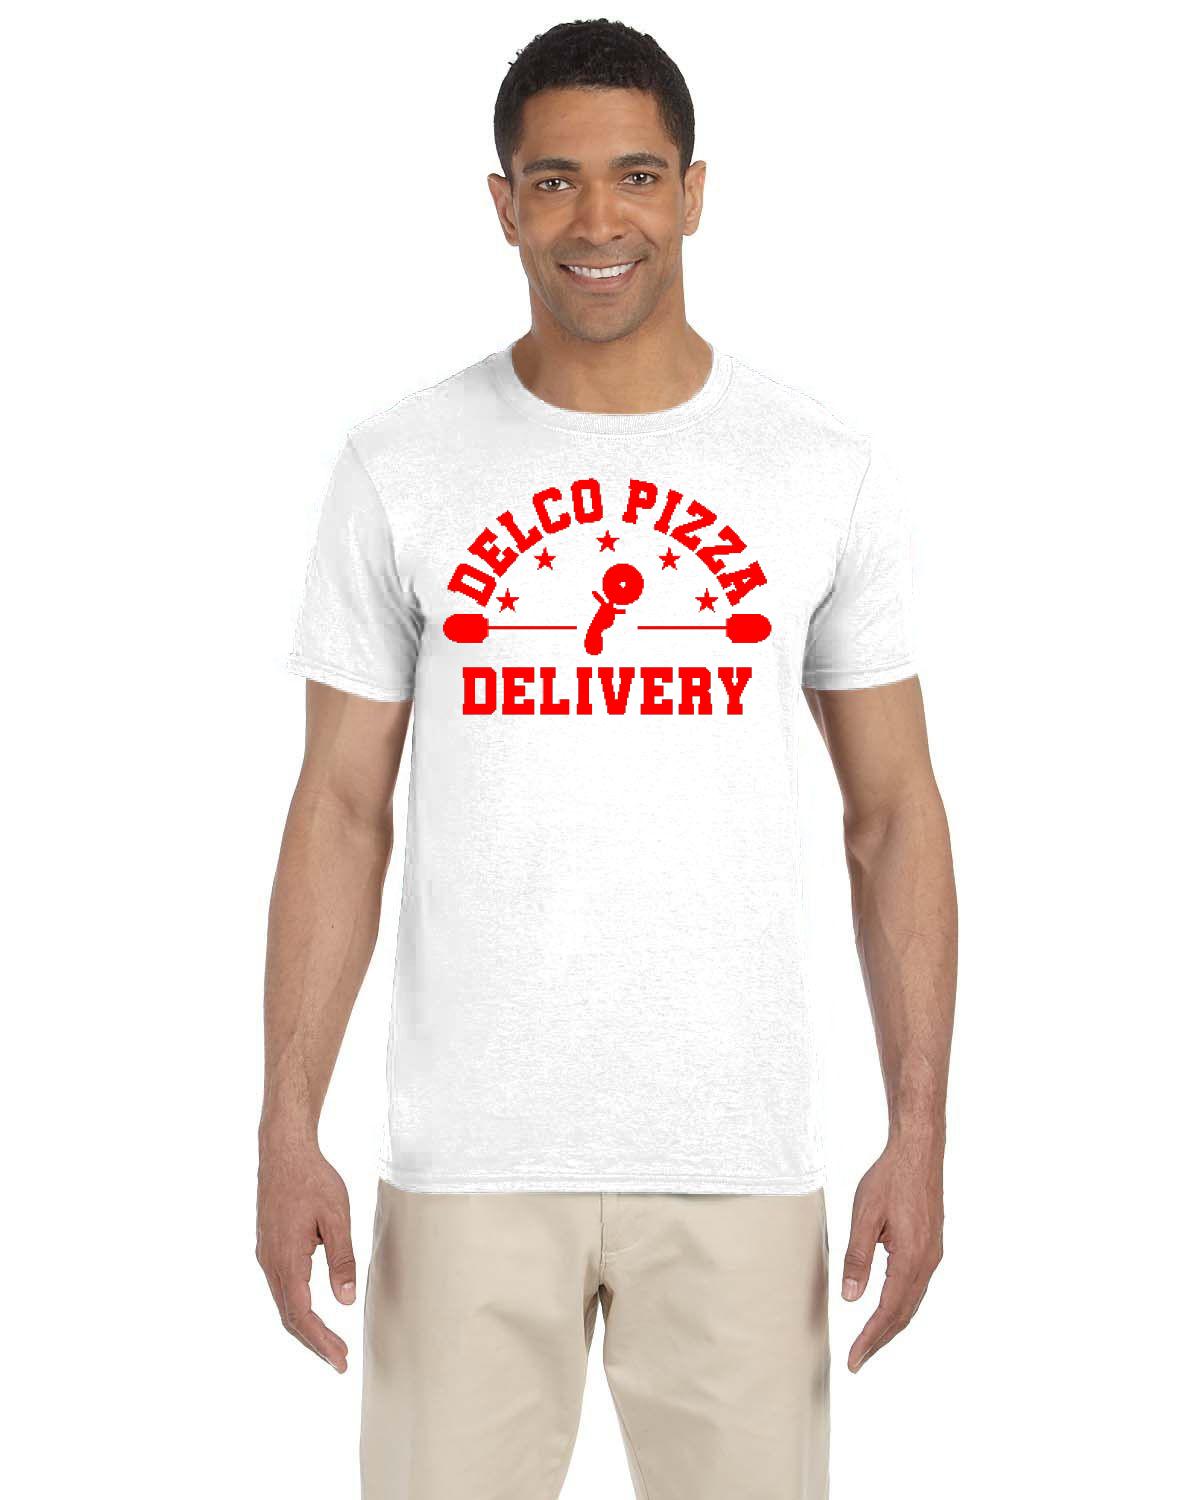 DELCO PIZZA DELIVERY Gildan Adult Softstyle 7.5 oz./lin. yd. T-Shirt | G640